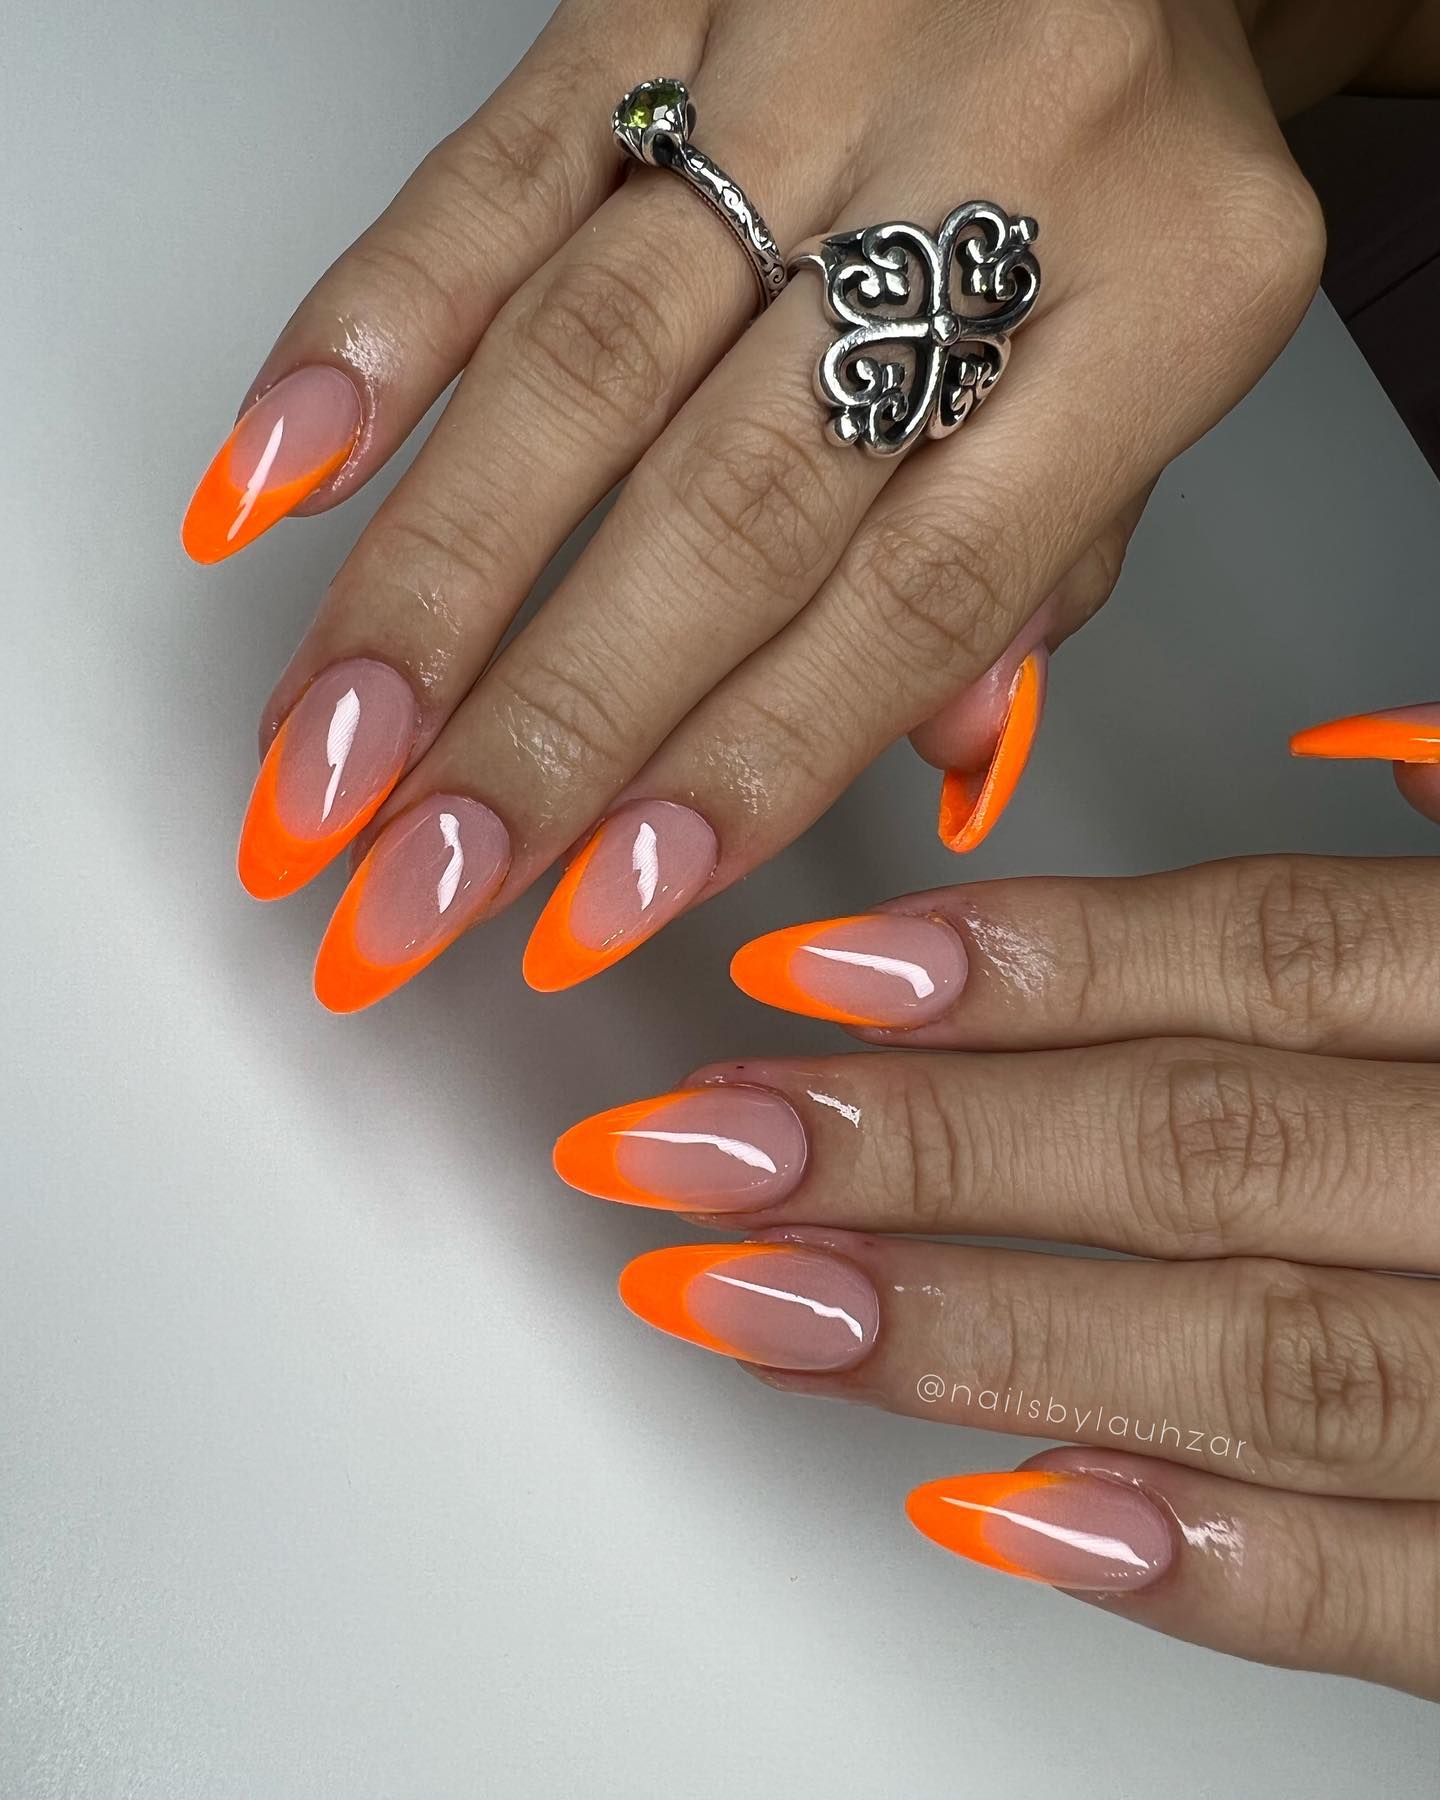 Here is the bomb. Neon orange French tips are an amazing way to express yourself! They're so vibrant and fun, and they look so good on everyone. It's great how bright the color is and it's such a unique shade that you can't find anywhere else!